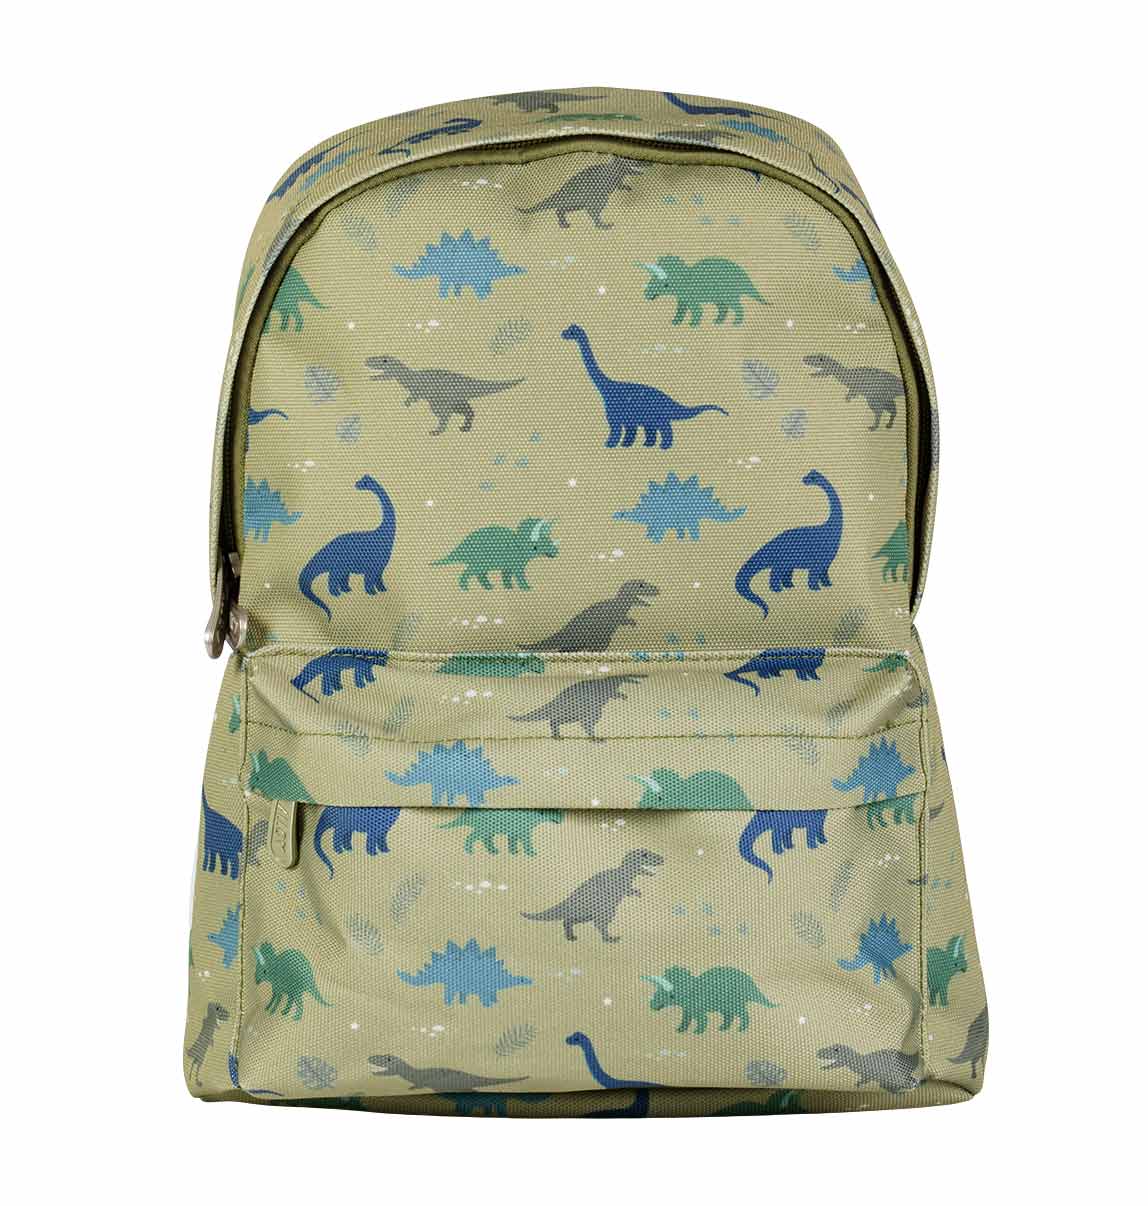 A LITTLE LOVELY COMPANY - Little backpack - Dinosaurs